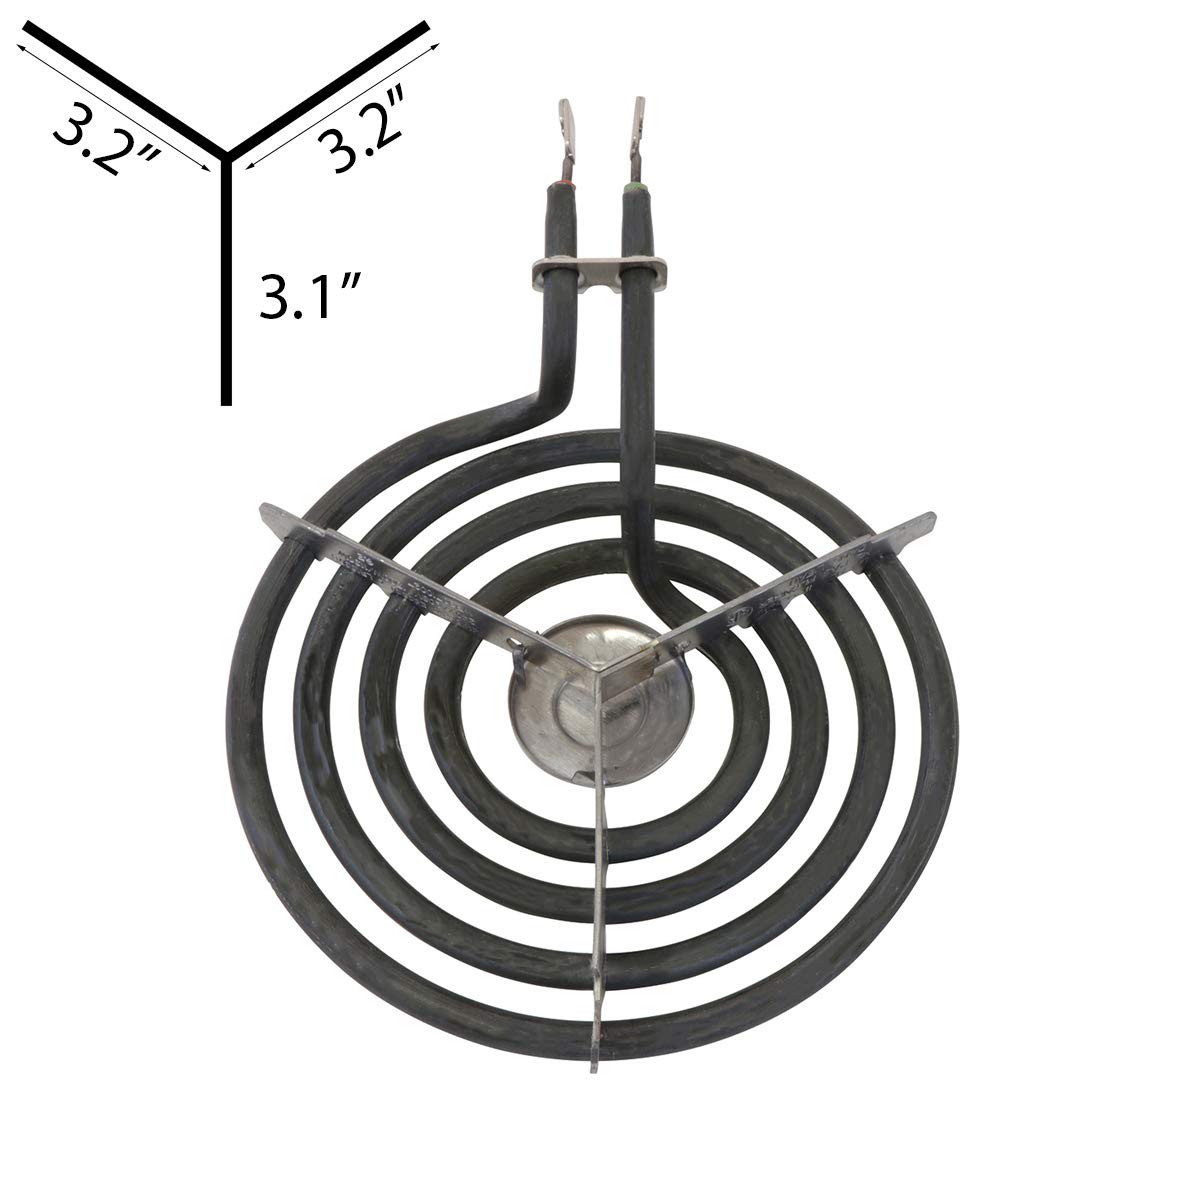 Kitchen Basics 101 WB30T10078, WB30X24401 Electric Range 4 Turn 6" Surface Element Replaces GE WB30X20479, PS11721464, WB30T10027, WB30T10111